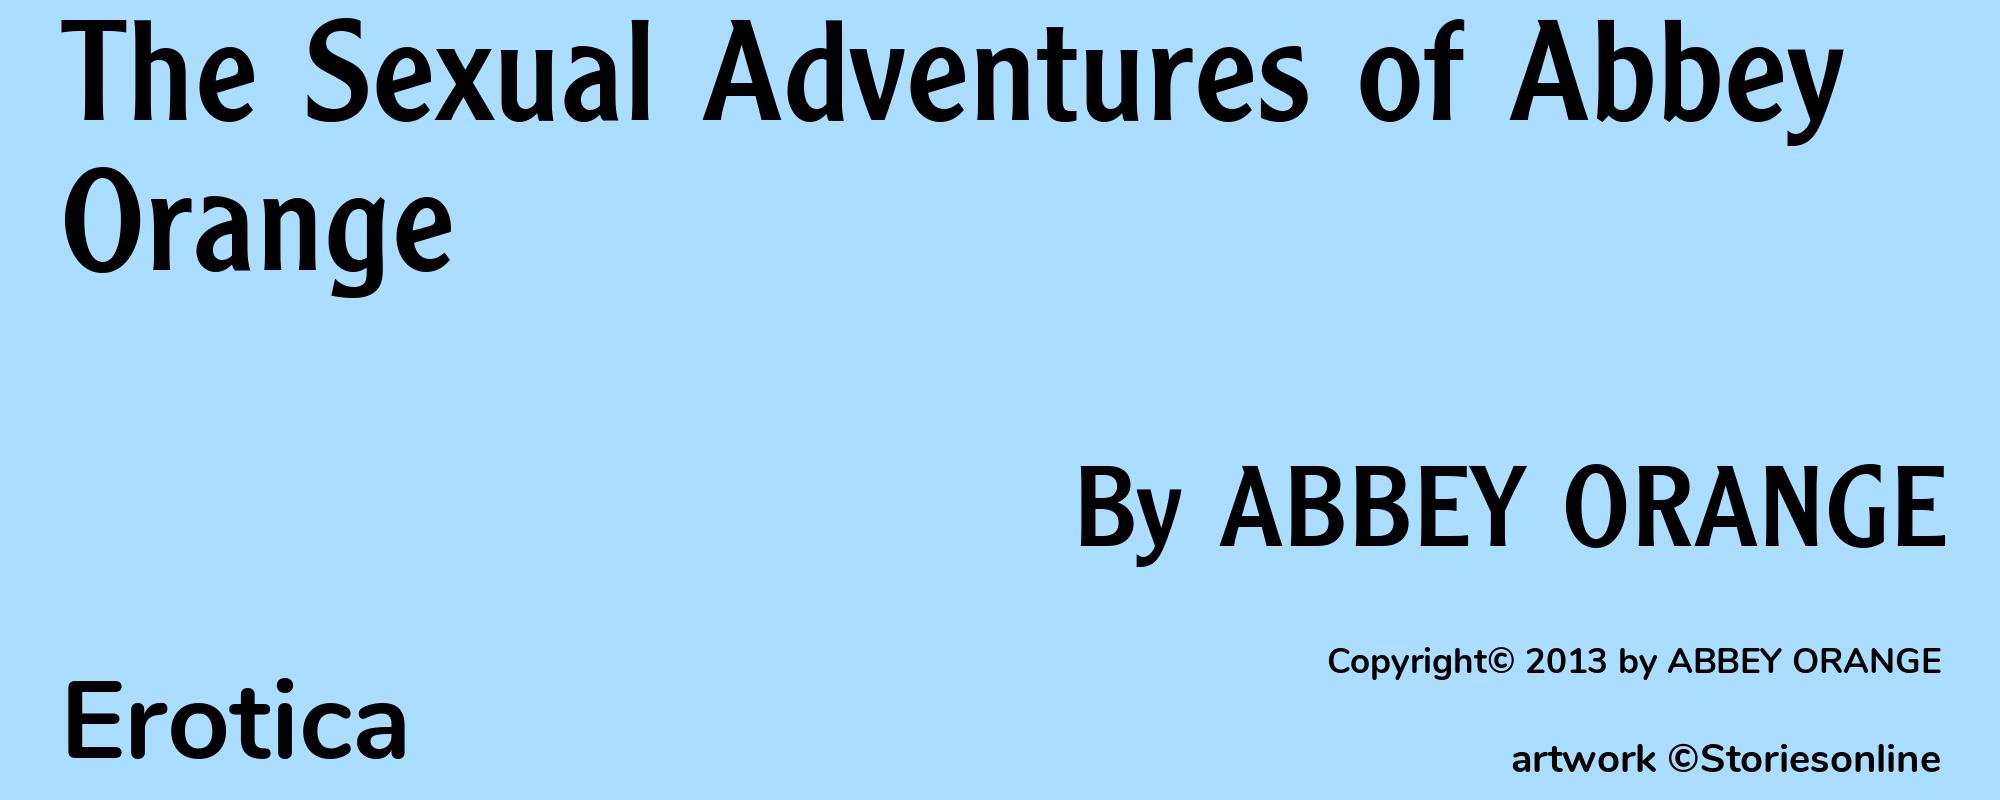 The Sexual Adventures of Abbey Orange - Cover